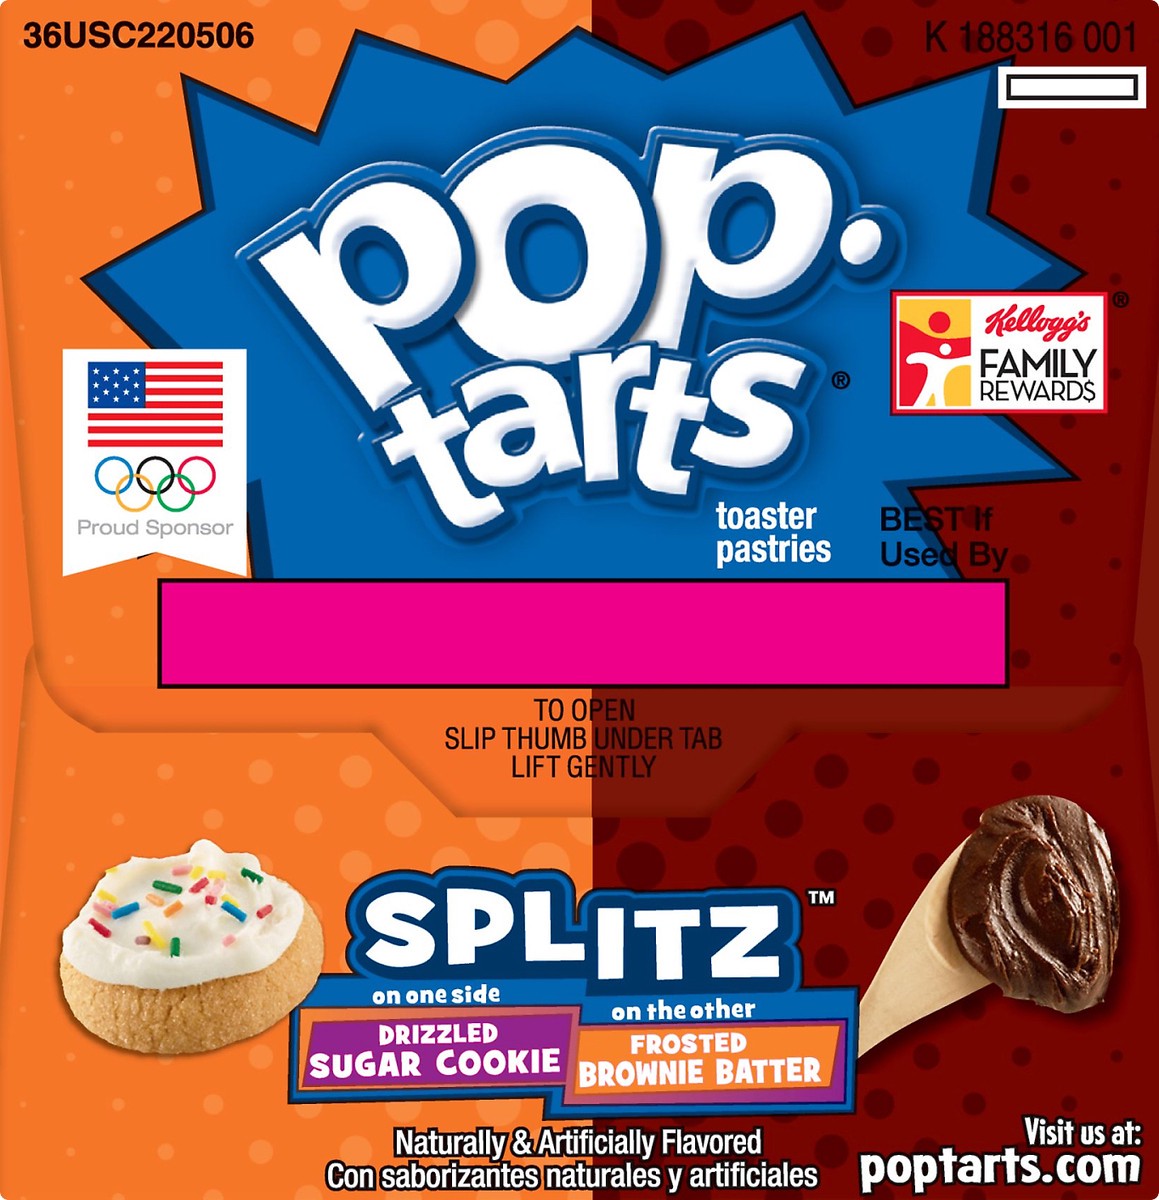 slide 4 of 8, Pop-Tarts Splitz Drizzled Sugar Cookie & Frosted Brownie Batter Breakfast Toaster Pastries, 8 ct